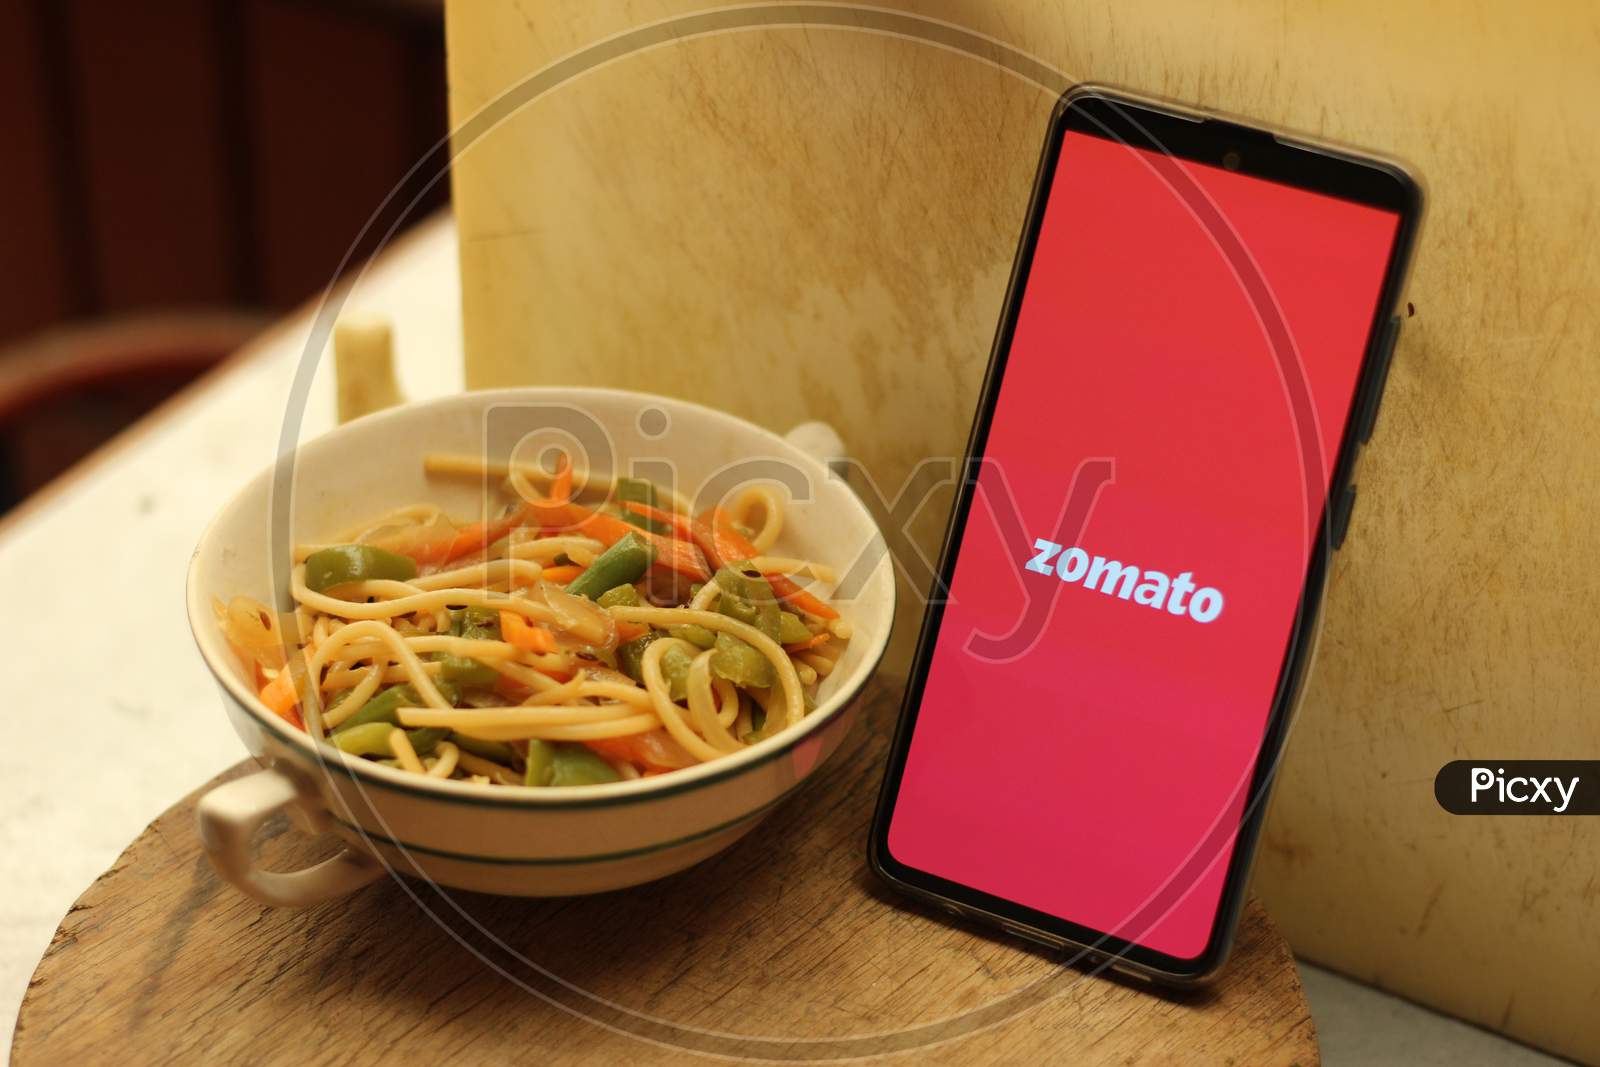 Zomato Food delivery application icon on smartphone.